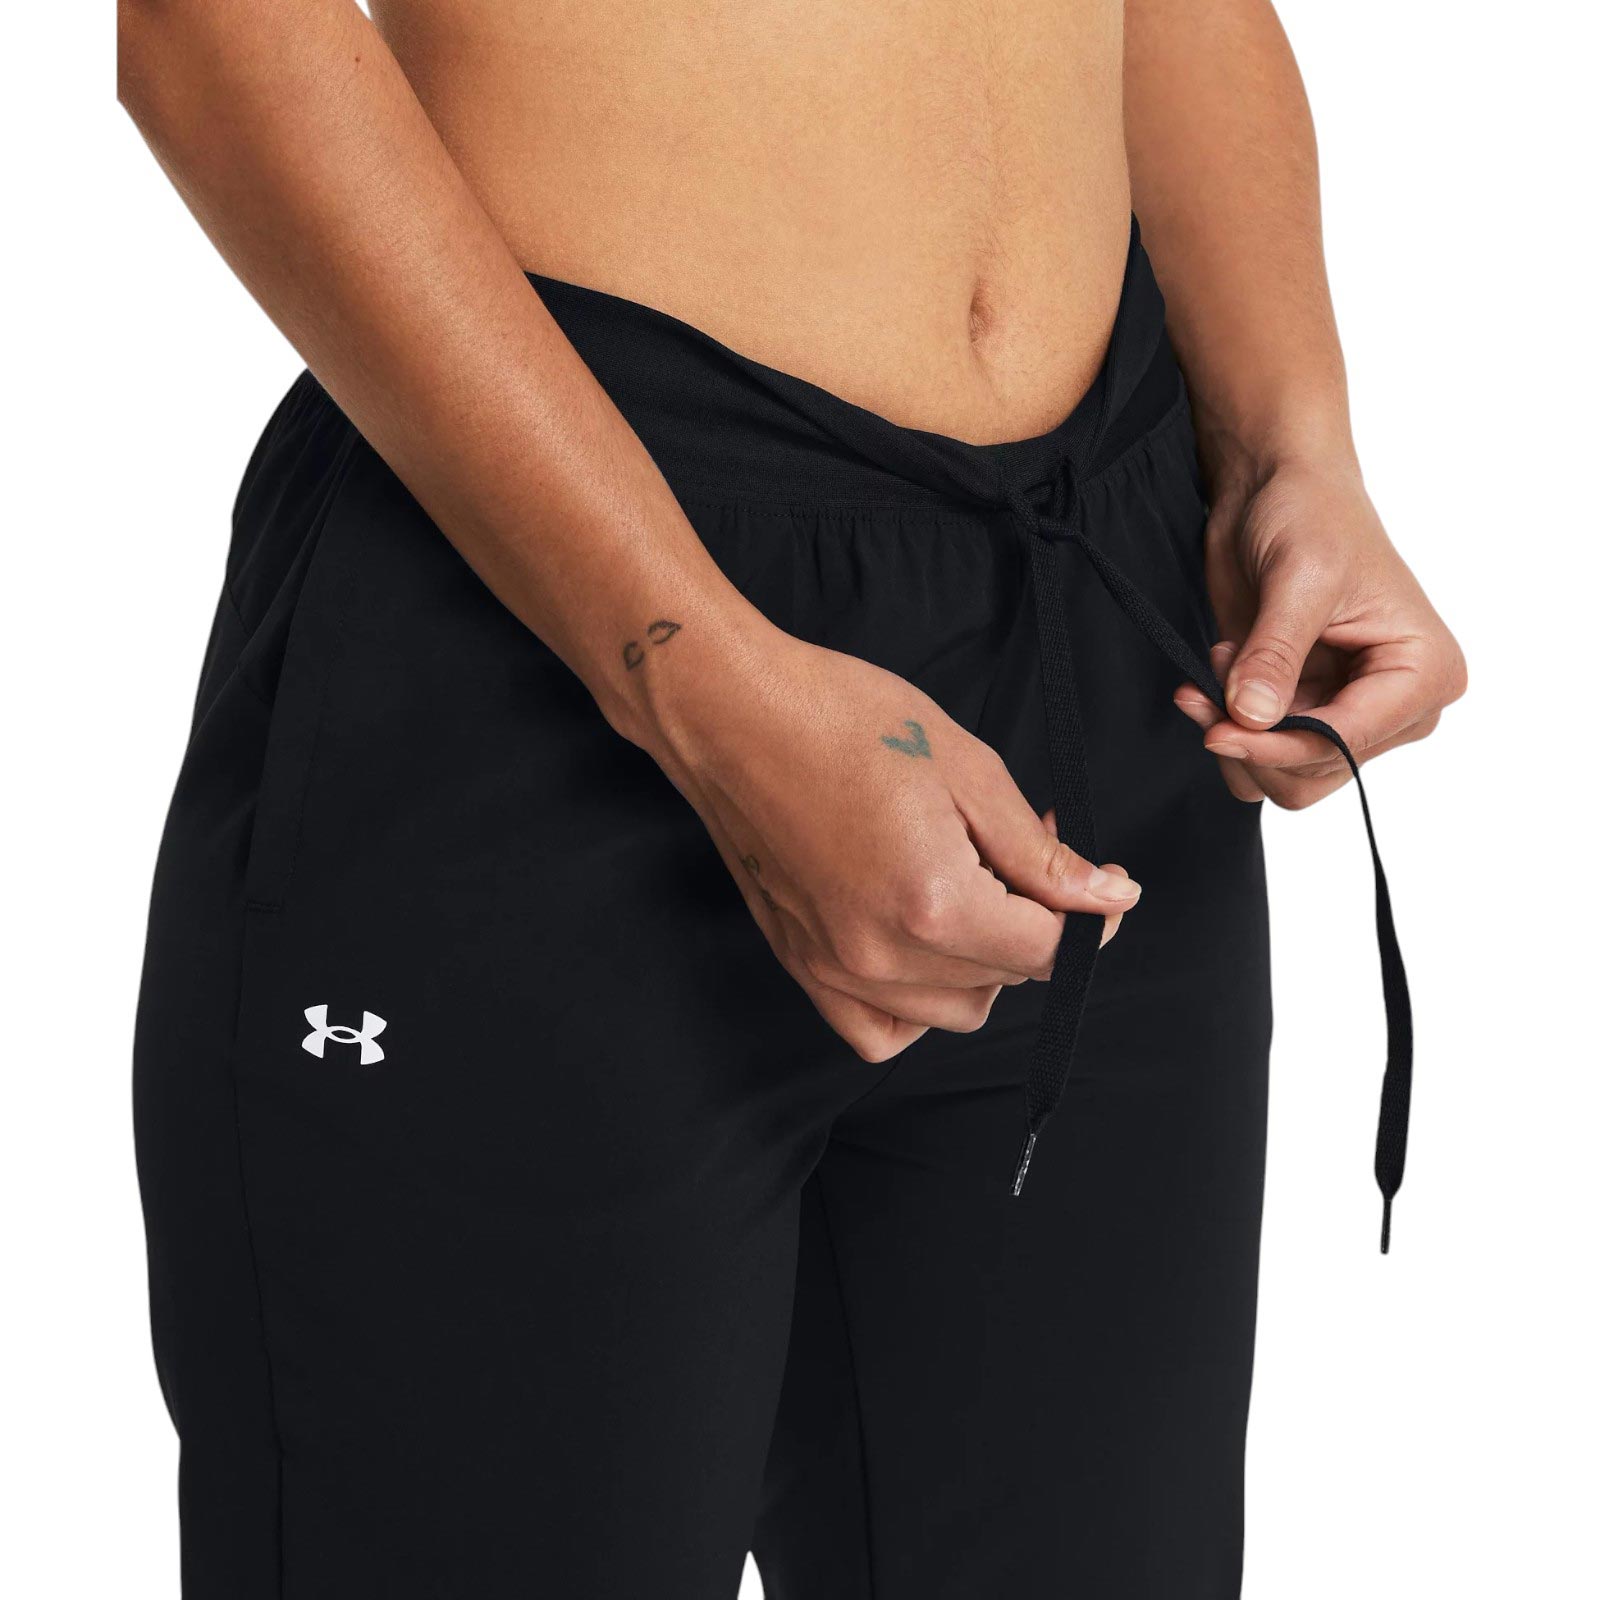 UNDER ARMOUR ARMOURSPORT HIGH-RISE WOVEN WOMENS PANTS